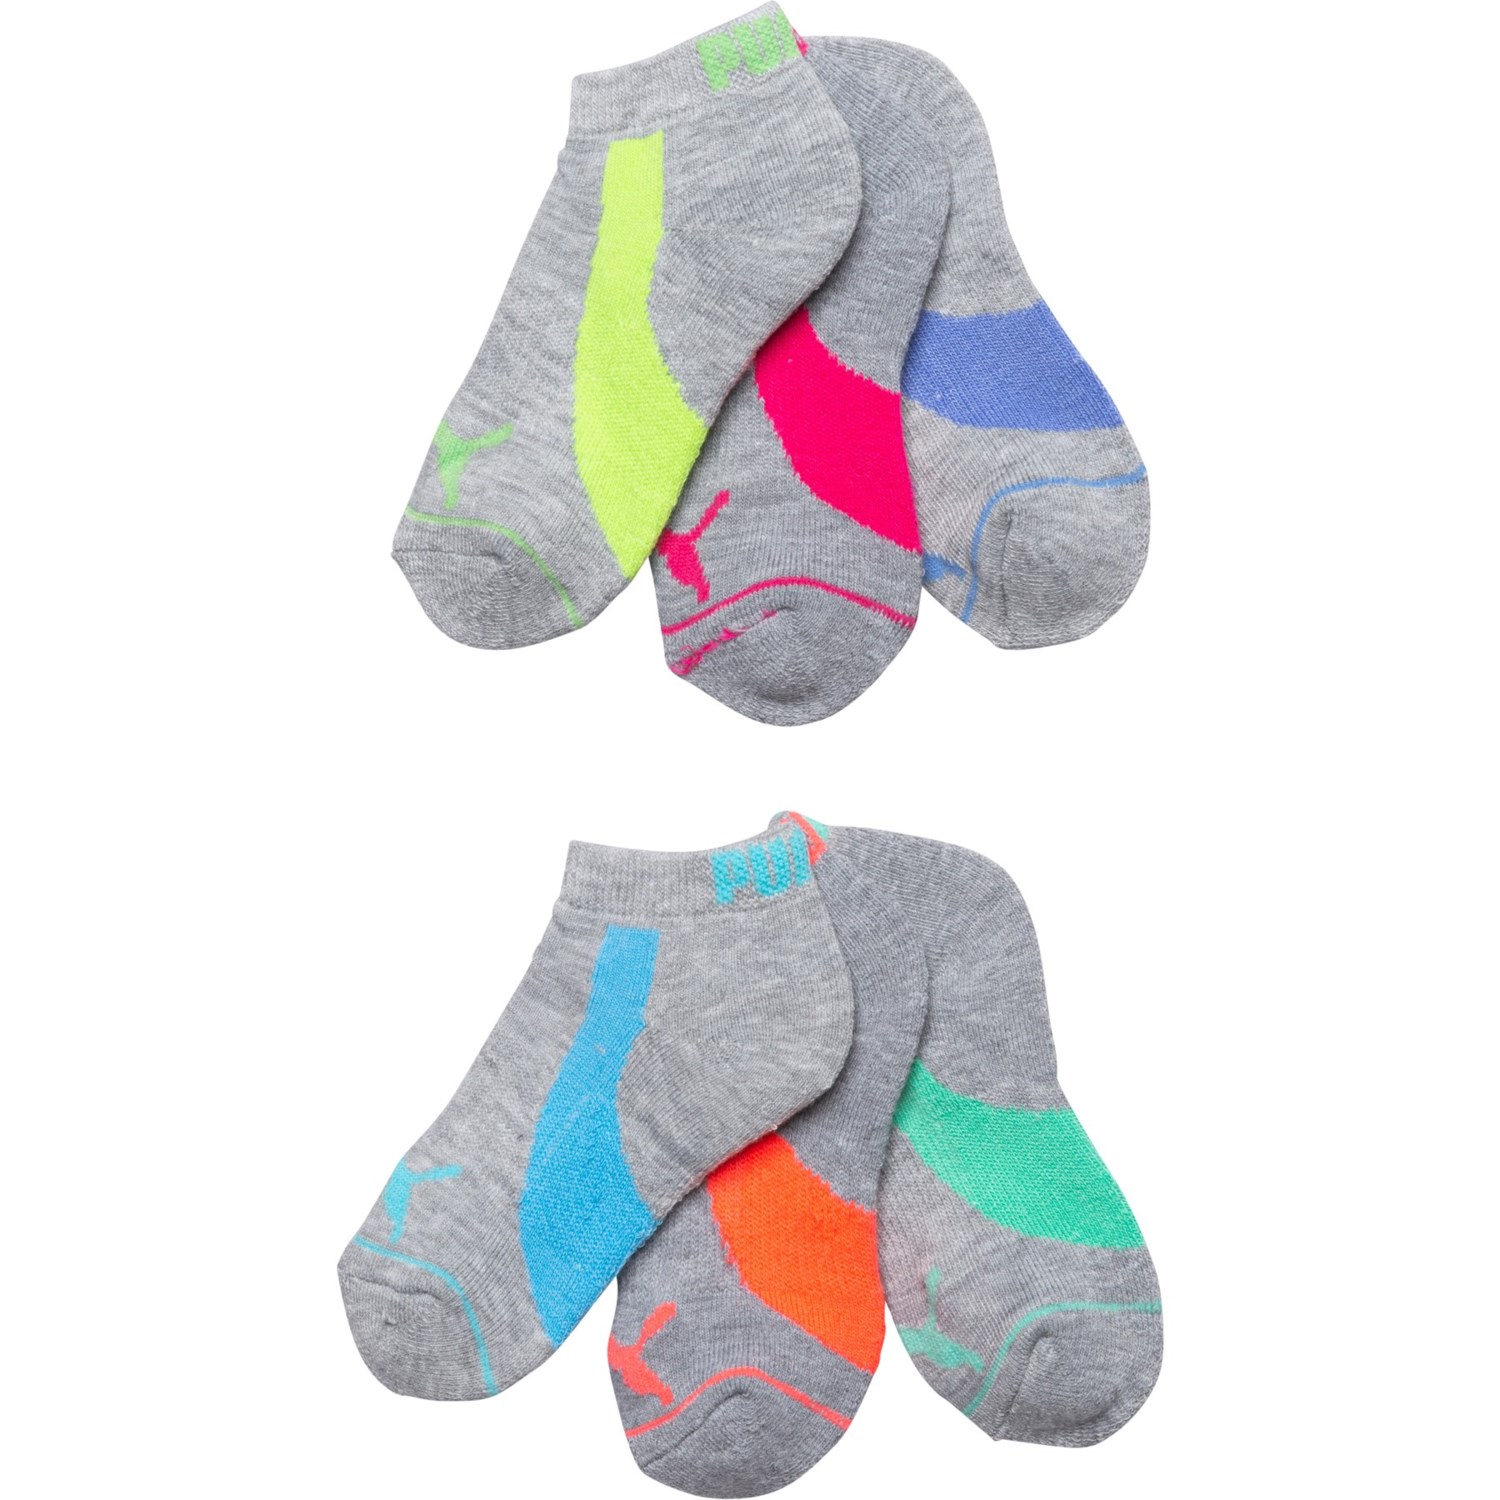 Puma Terry Low-Cut Athletic Performance Socks (For Girls) - Save 50%